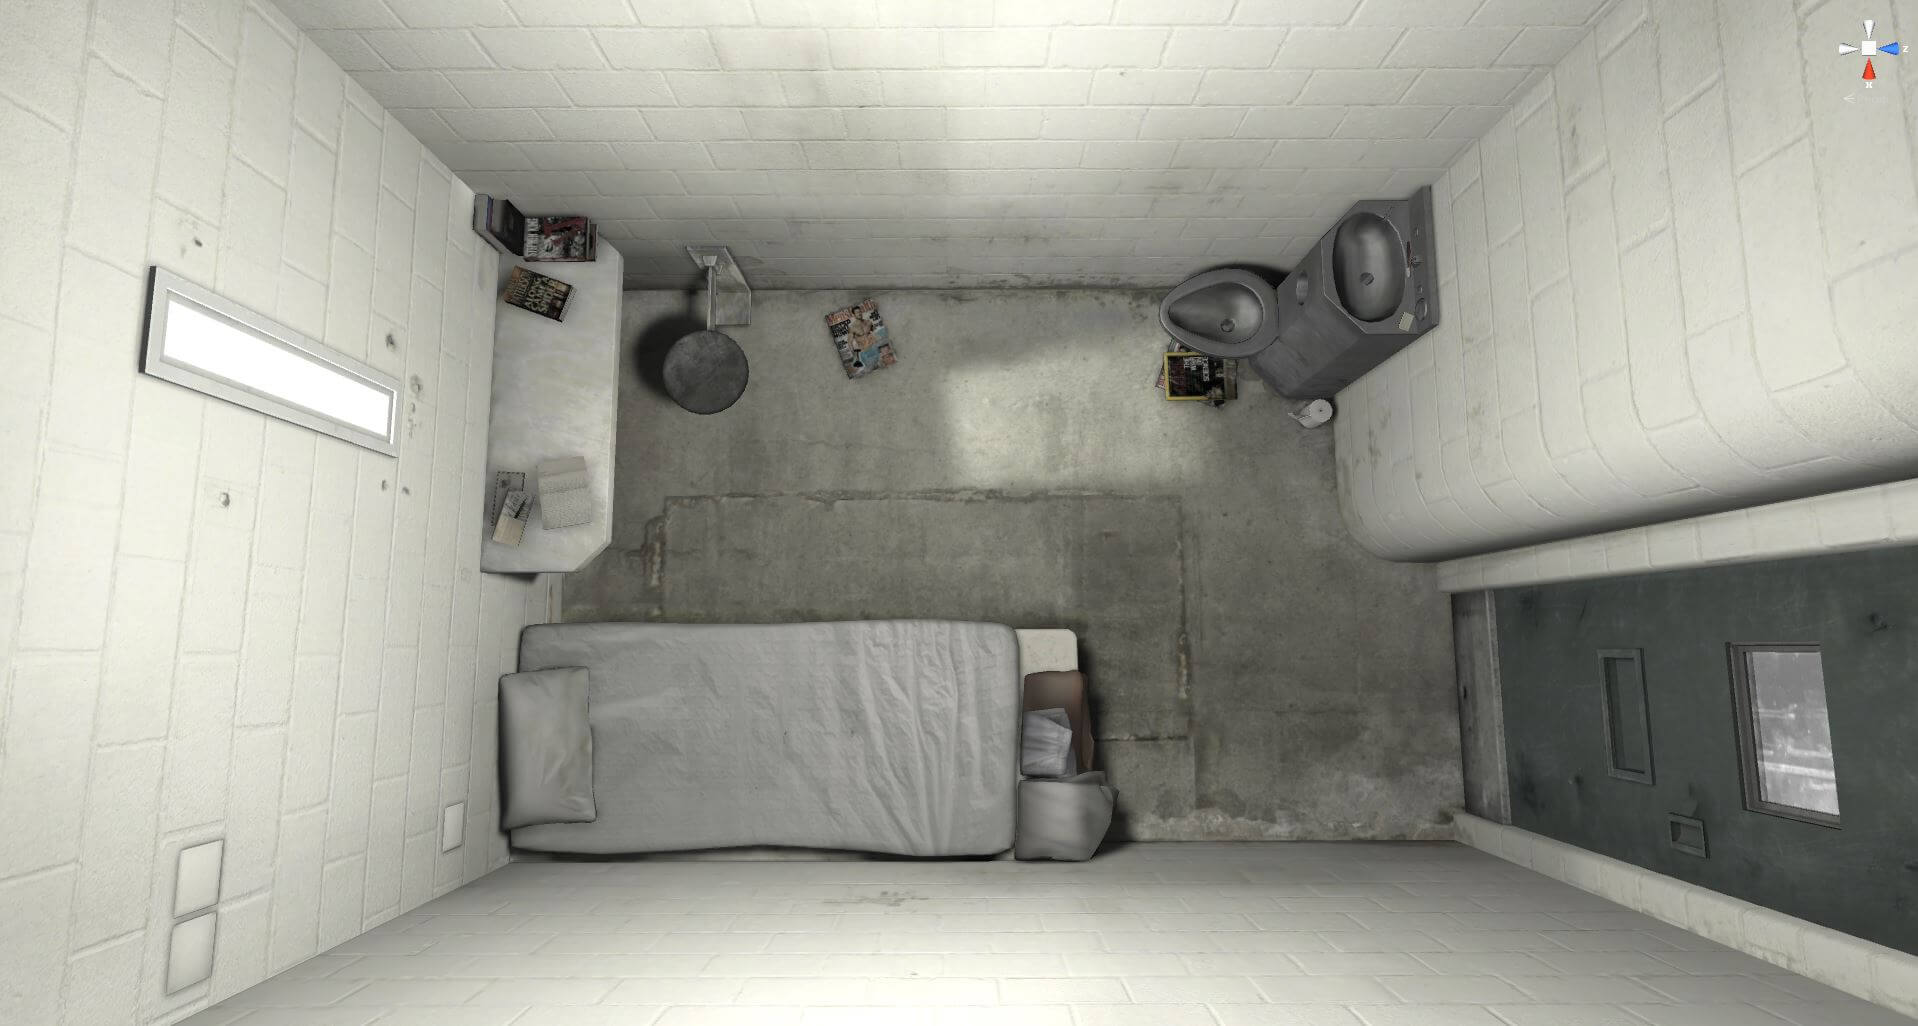 6X9: An Immersive Experience of Solitary Confinement